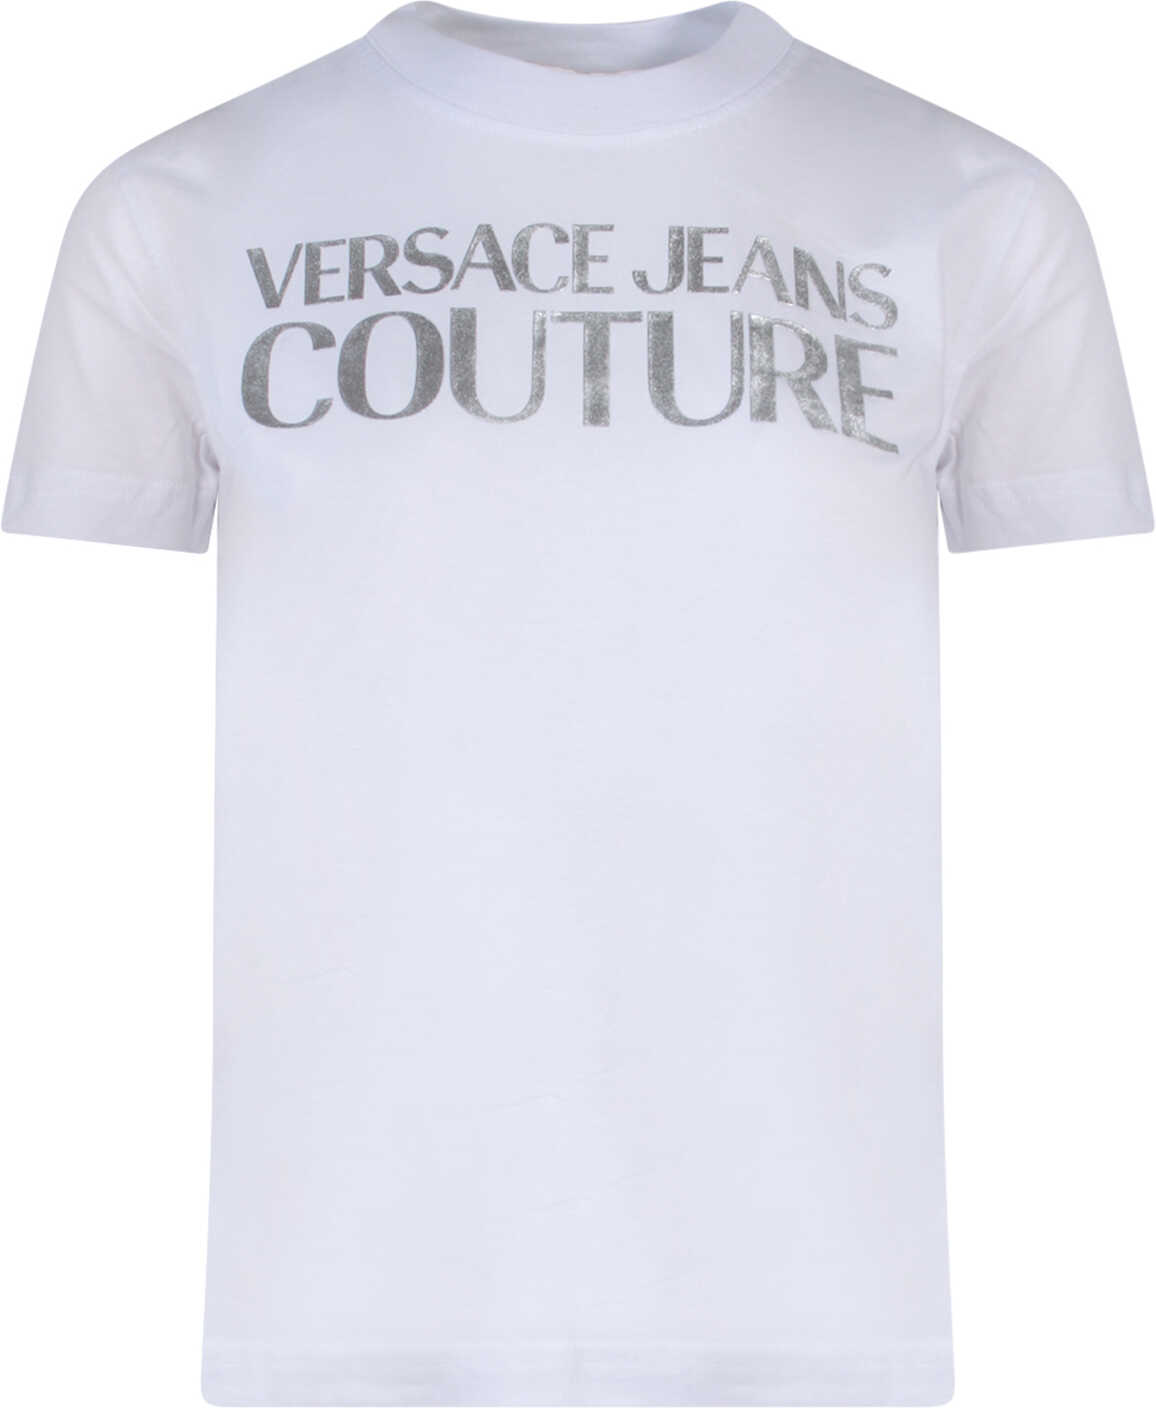 Versace Jeans Couture T-Shirt White